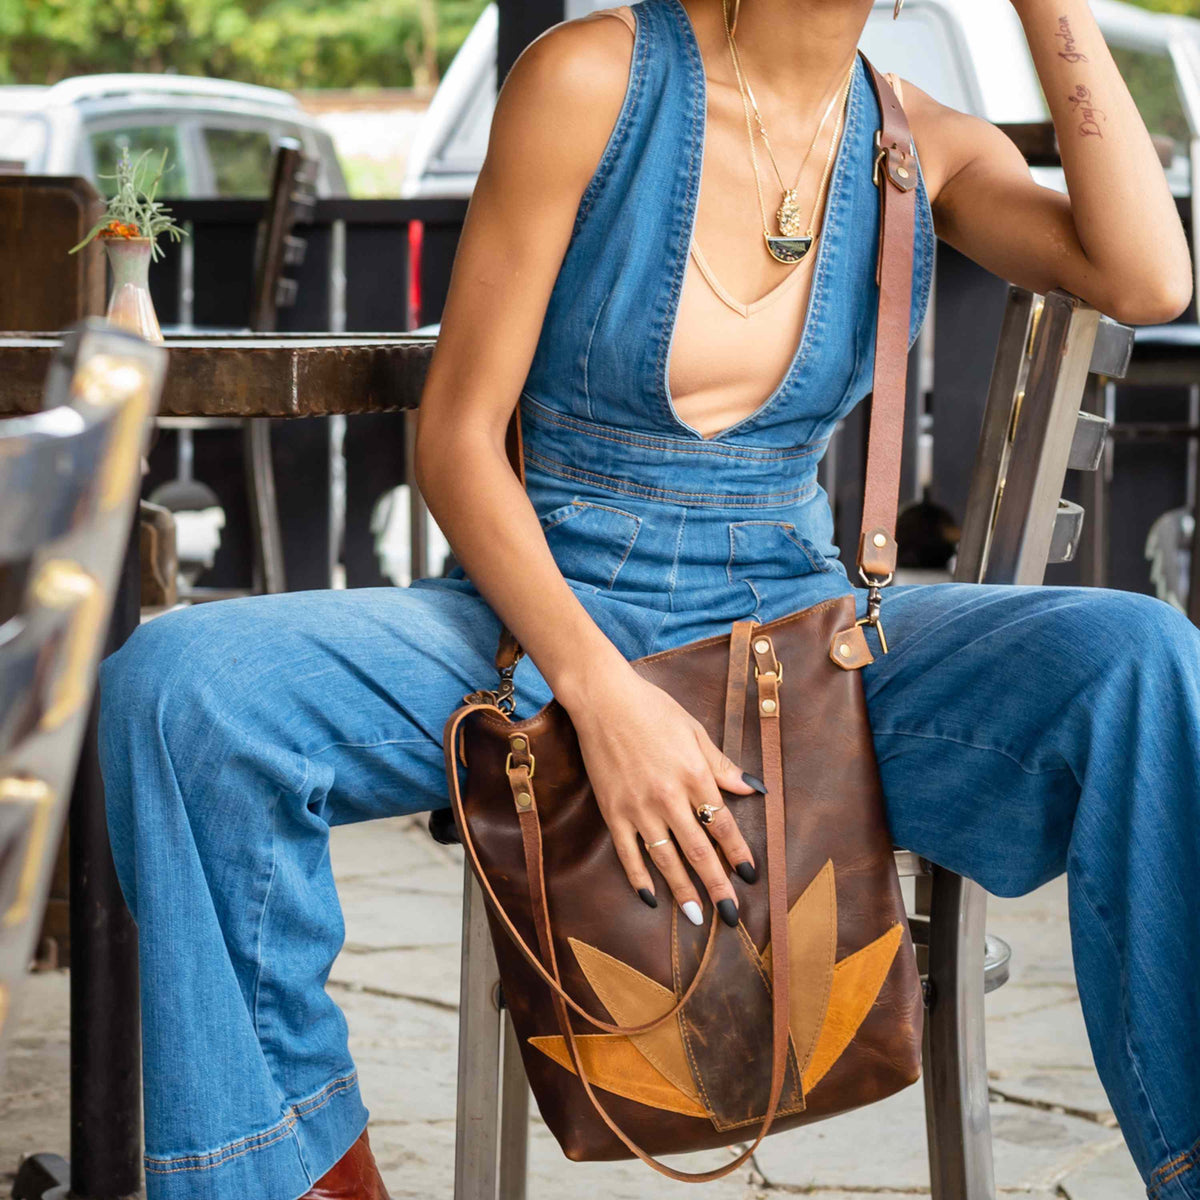 The Crossbody Bag Trend Will Be Your 2023 Go-To Style